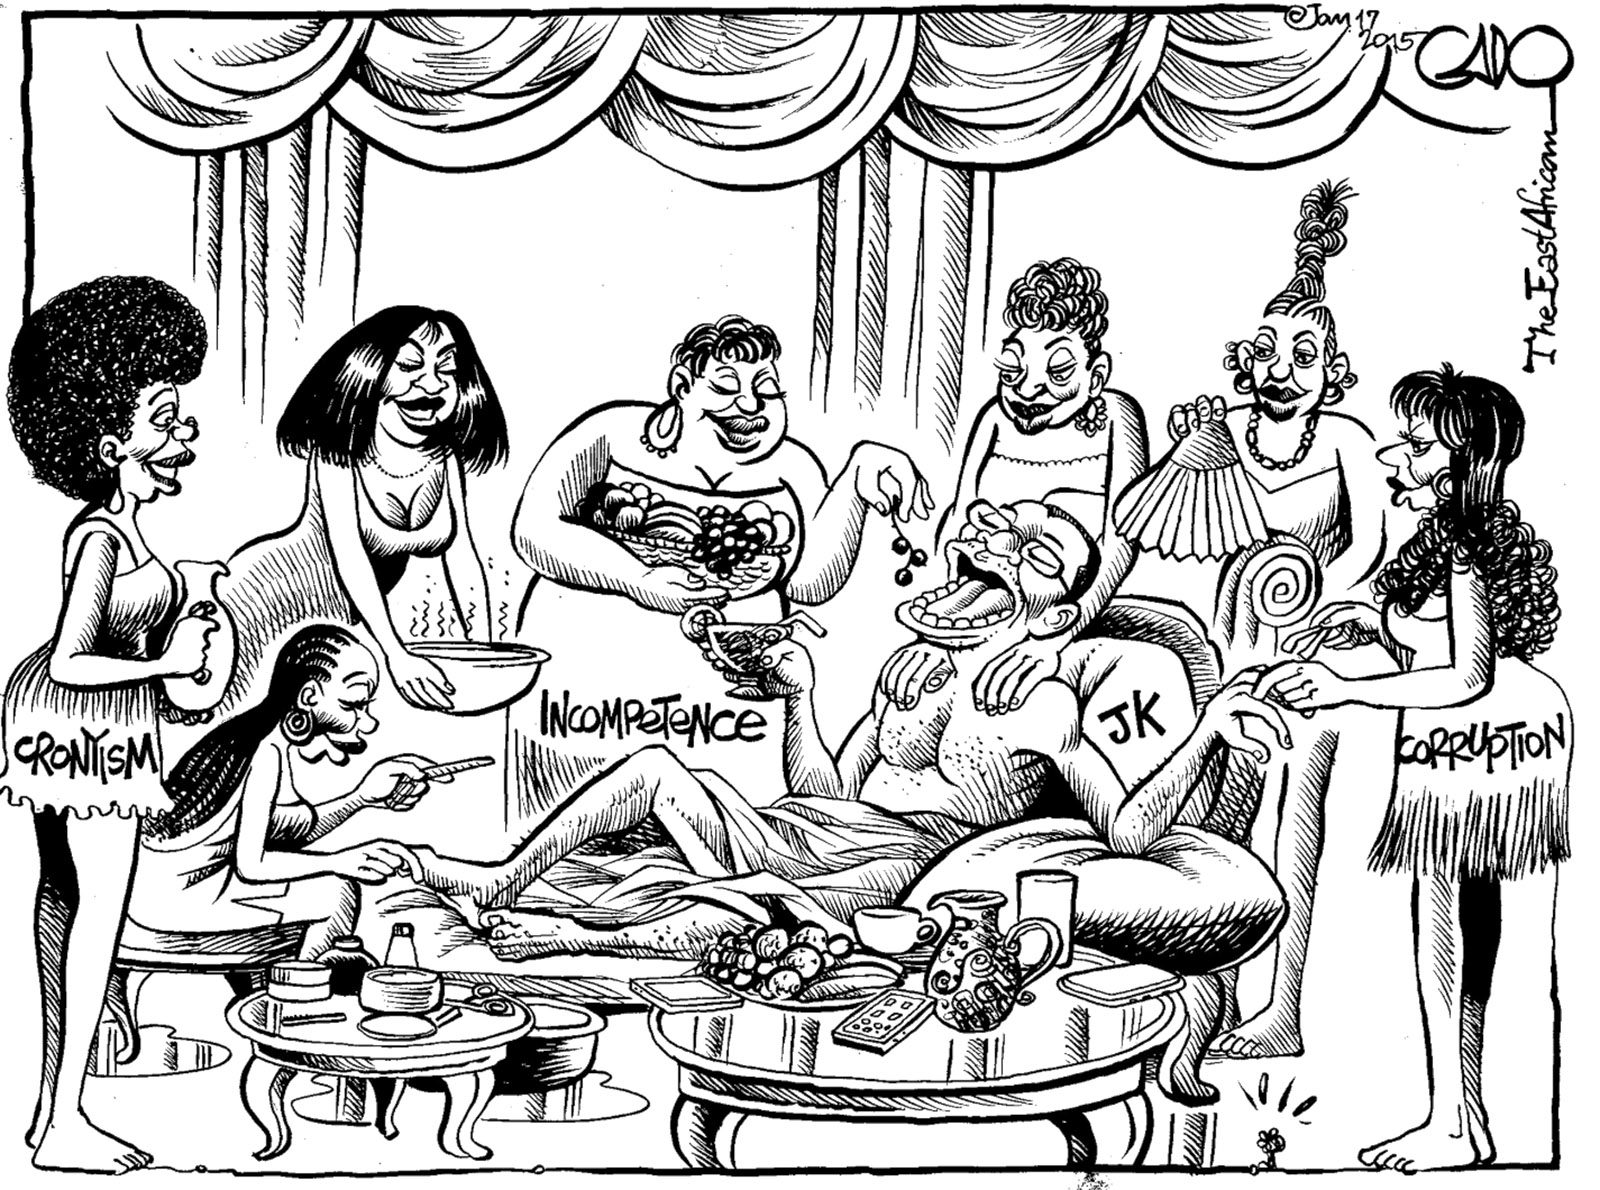 Tanzanian President Jakaya Kikwete surrounded by Cronyism, Incompetence, and Corruption; drawing by the well-known cartoonist Gado. Its publication in the East African in January 2015 led to the temporary banning of the newspaper from Tanzania and eventually to Gado’s dismissal from its sister newspaper, the Nation, published in Nairobi, Kenya, where he had worked since 1992.